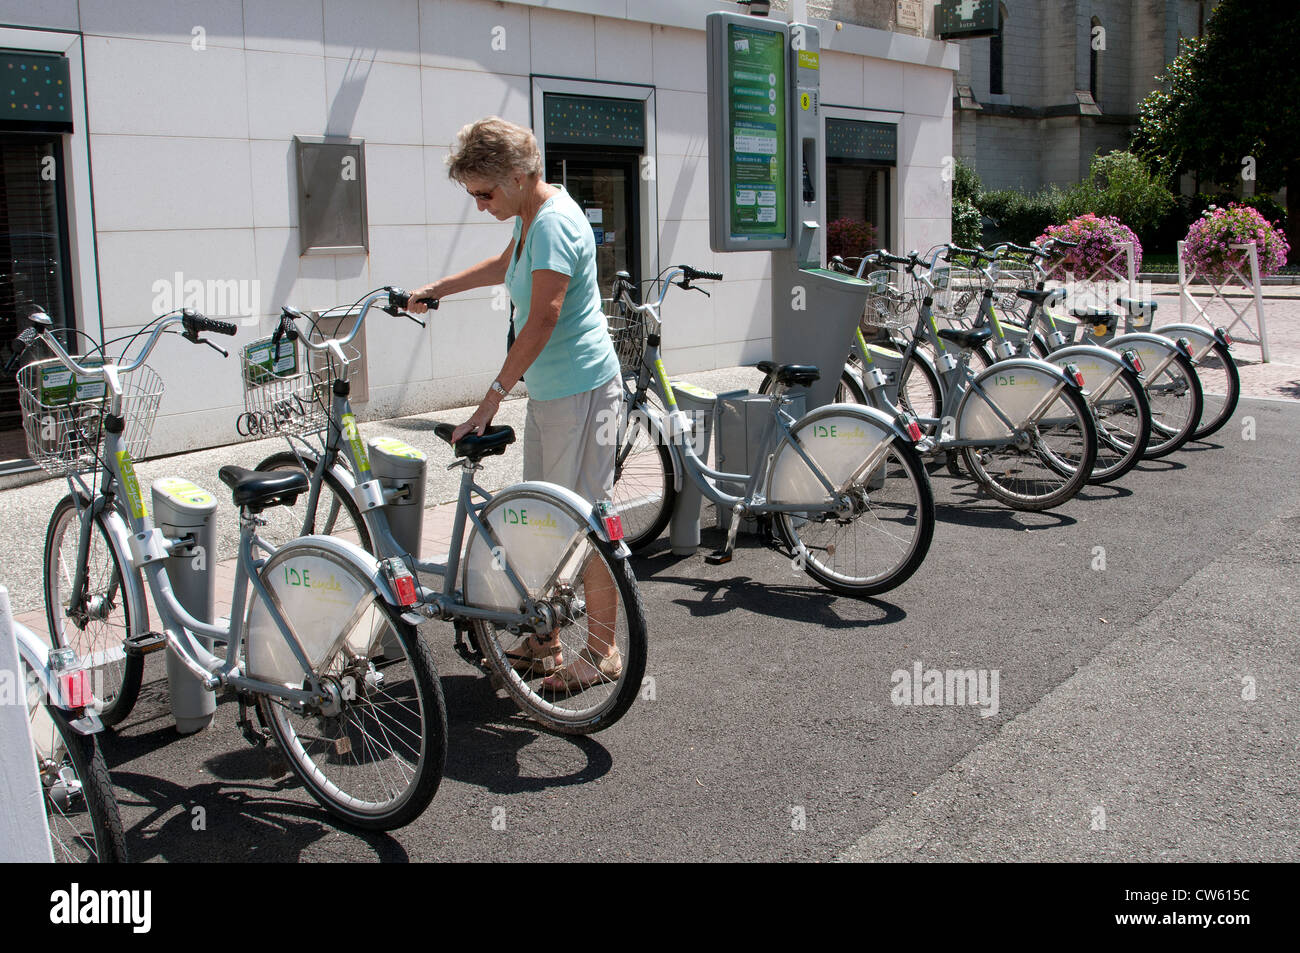 IDE cycle system in Pau city centre southwest France Woman collecting a bicycle to tour the city Stock Photo